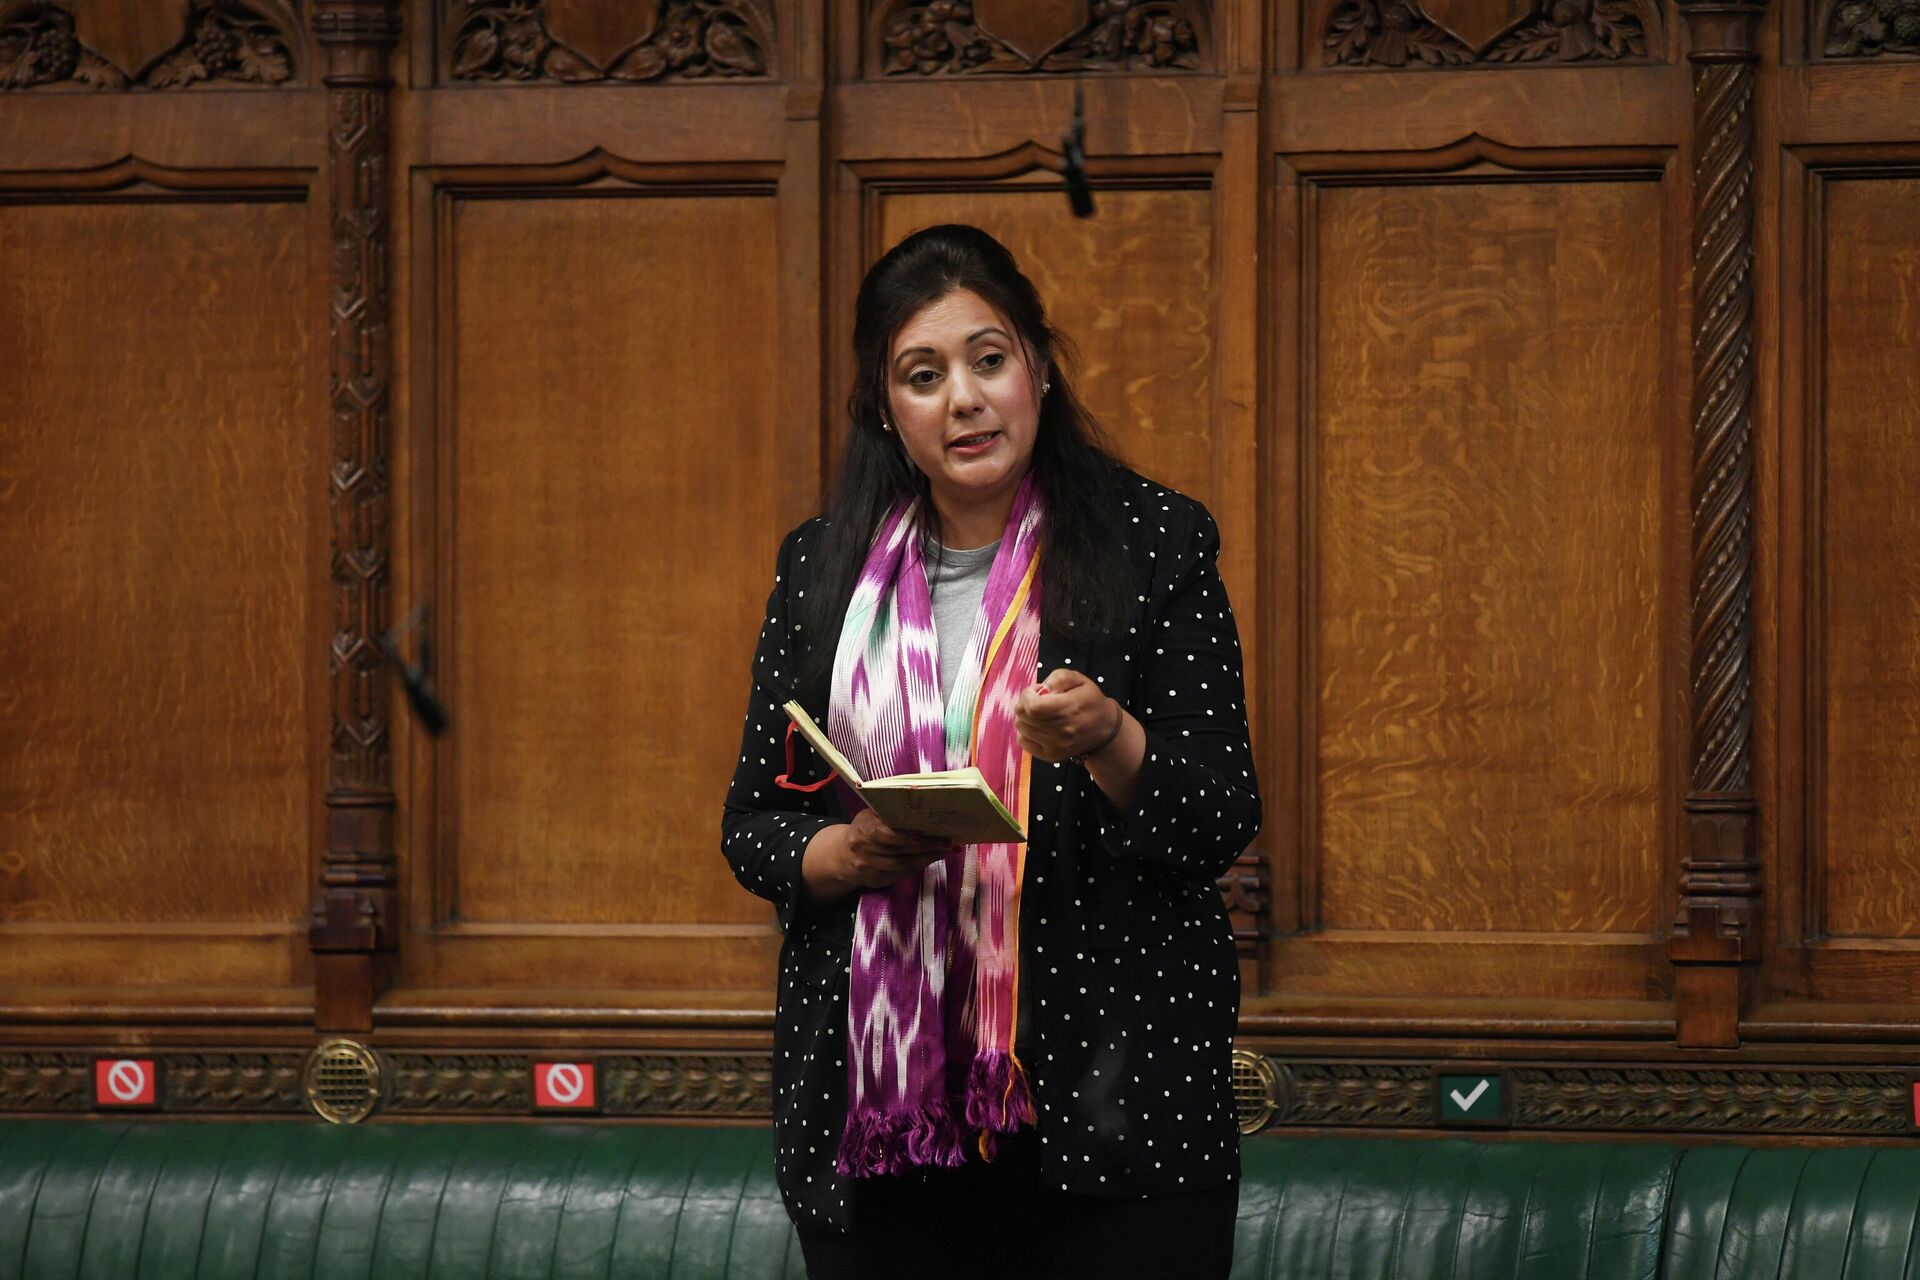 FILE PHOTO: MP Nusrat Ghani speaks during a session in Parliament in London, Britain May 12, 2021 - Sputnik International, 1920, 25.01.2022